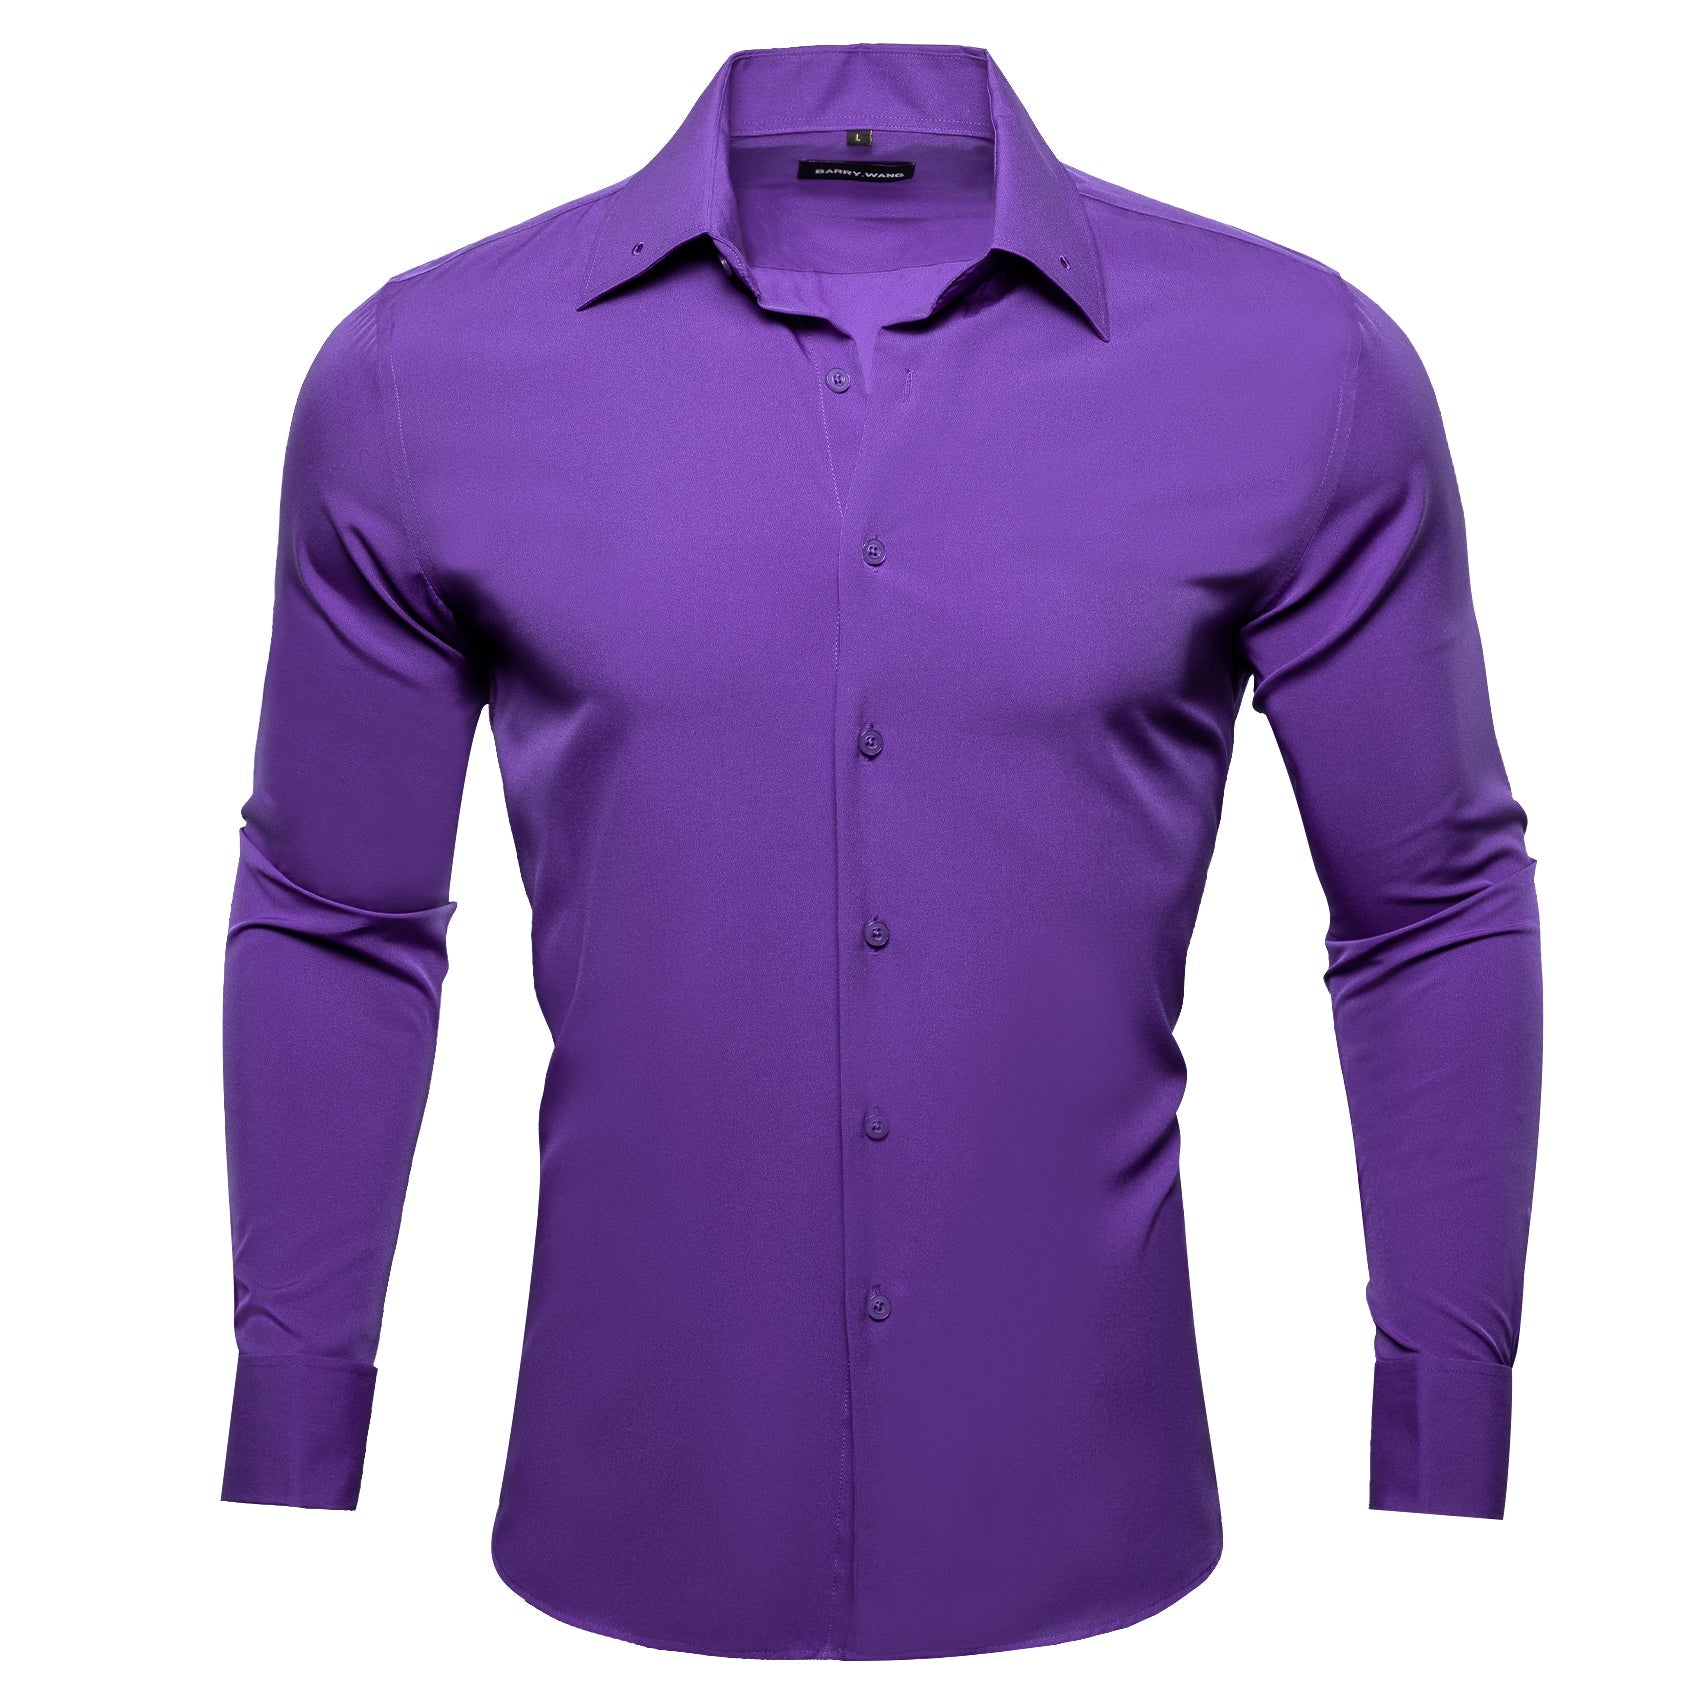 Barry.wang Blueviolet Solid Silk Shirt with Collar Pin